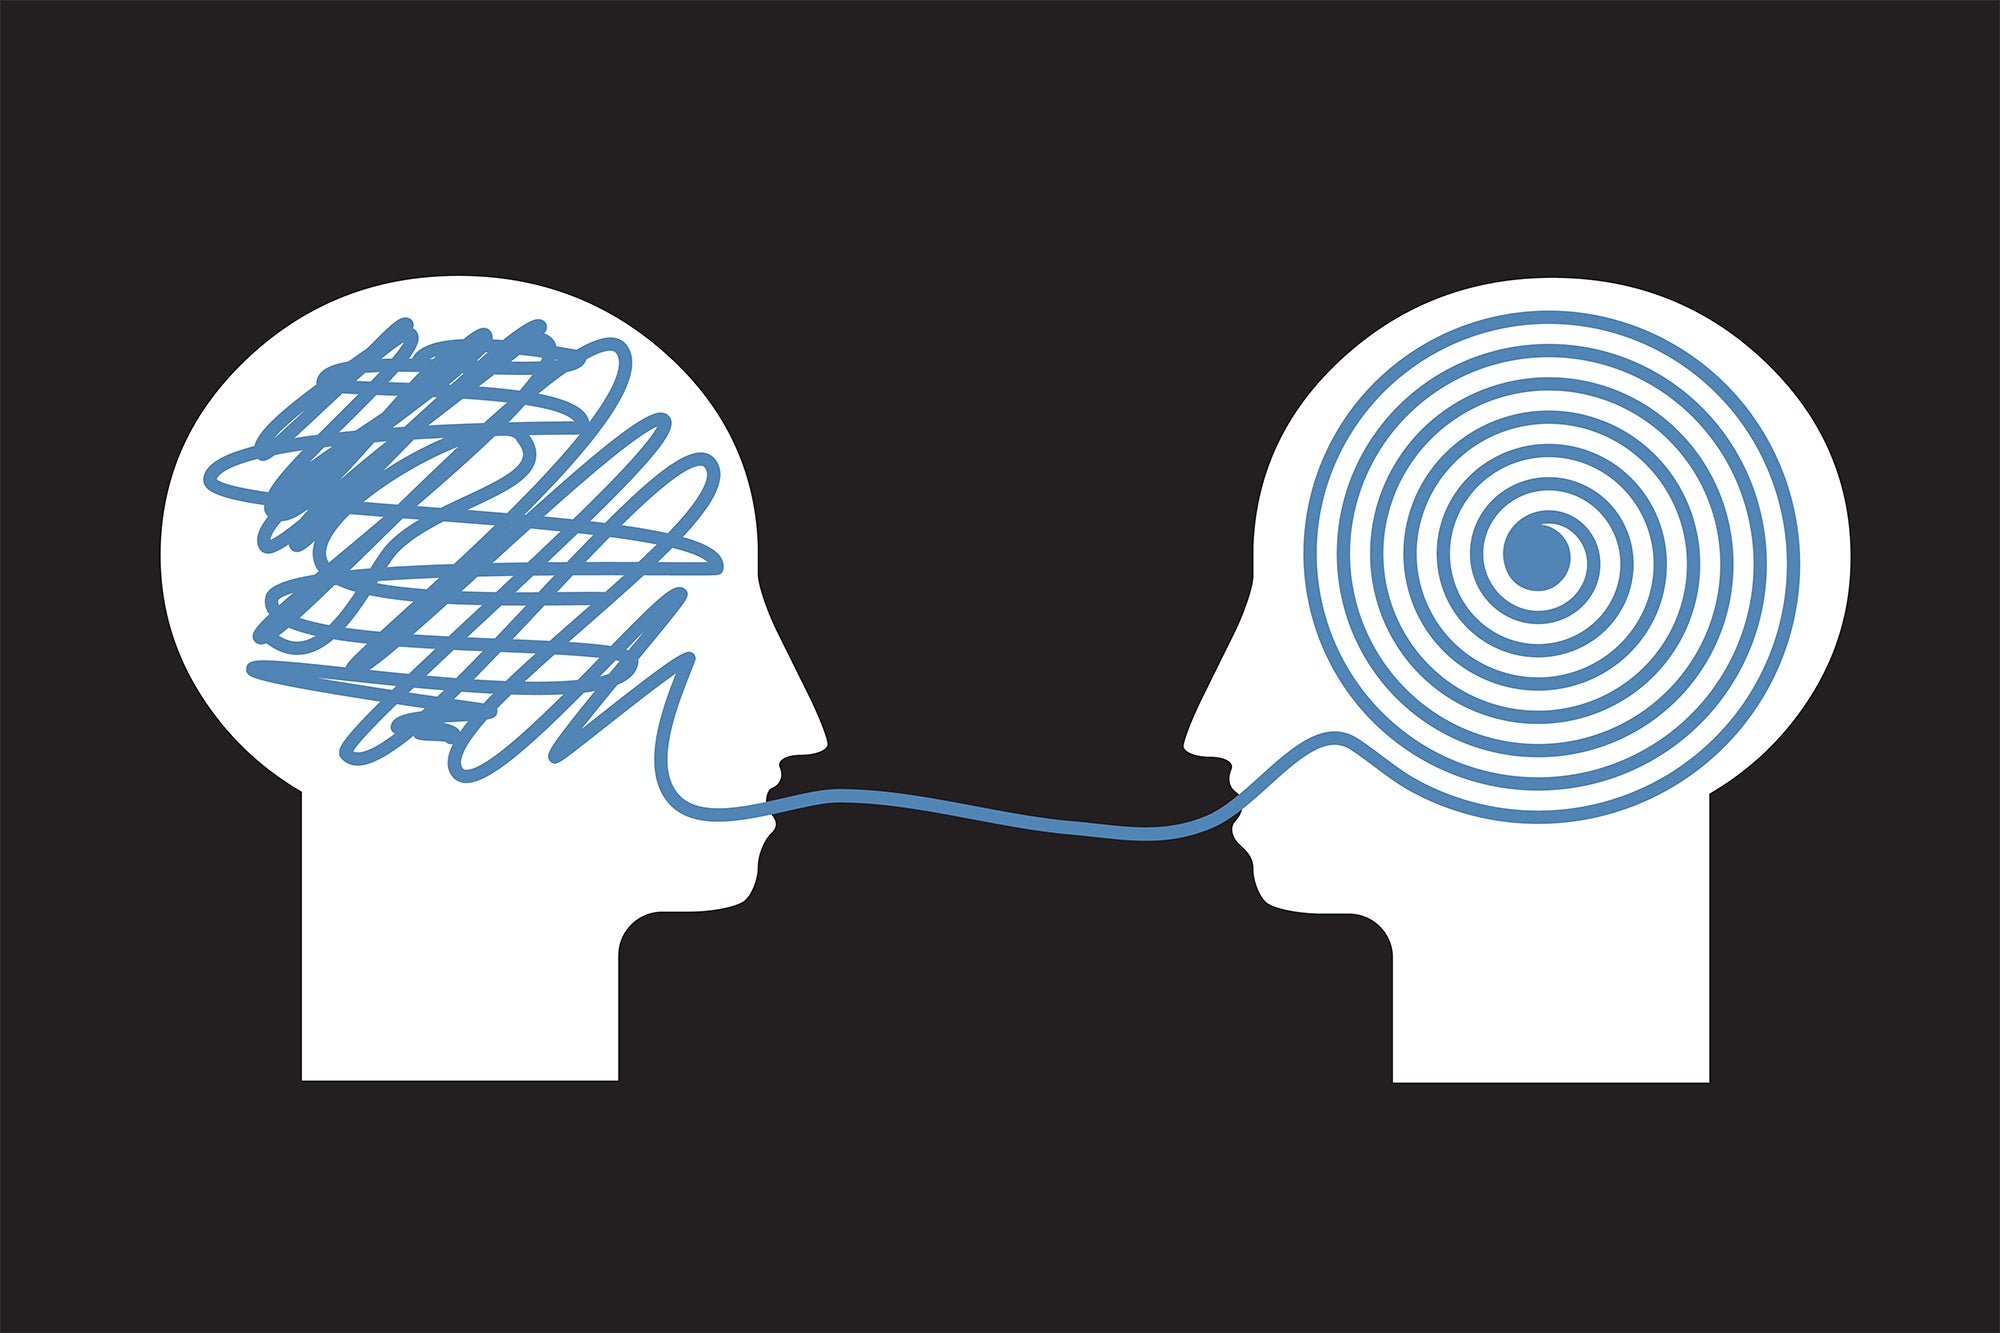 An illustration of decoding and problem-solving, represented by simple white silhouette of two human heads facing each other with line drawing of a scribble inside the head on the left which turns into an organized spiral inside the head on the right.